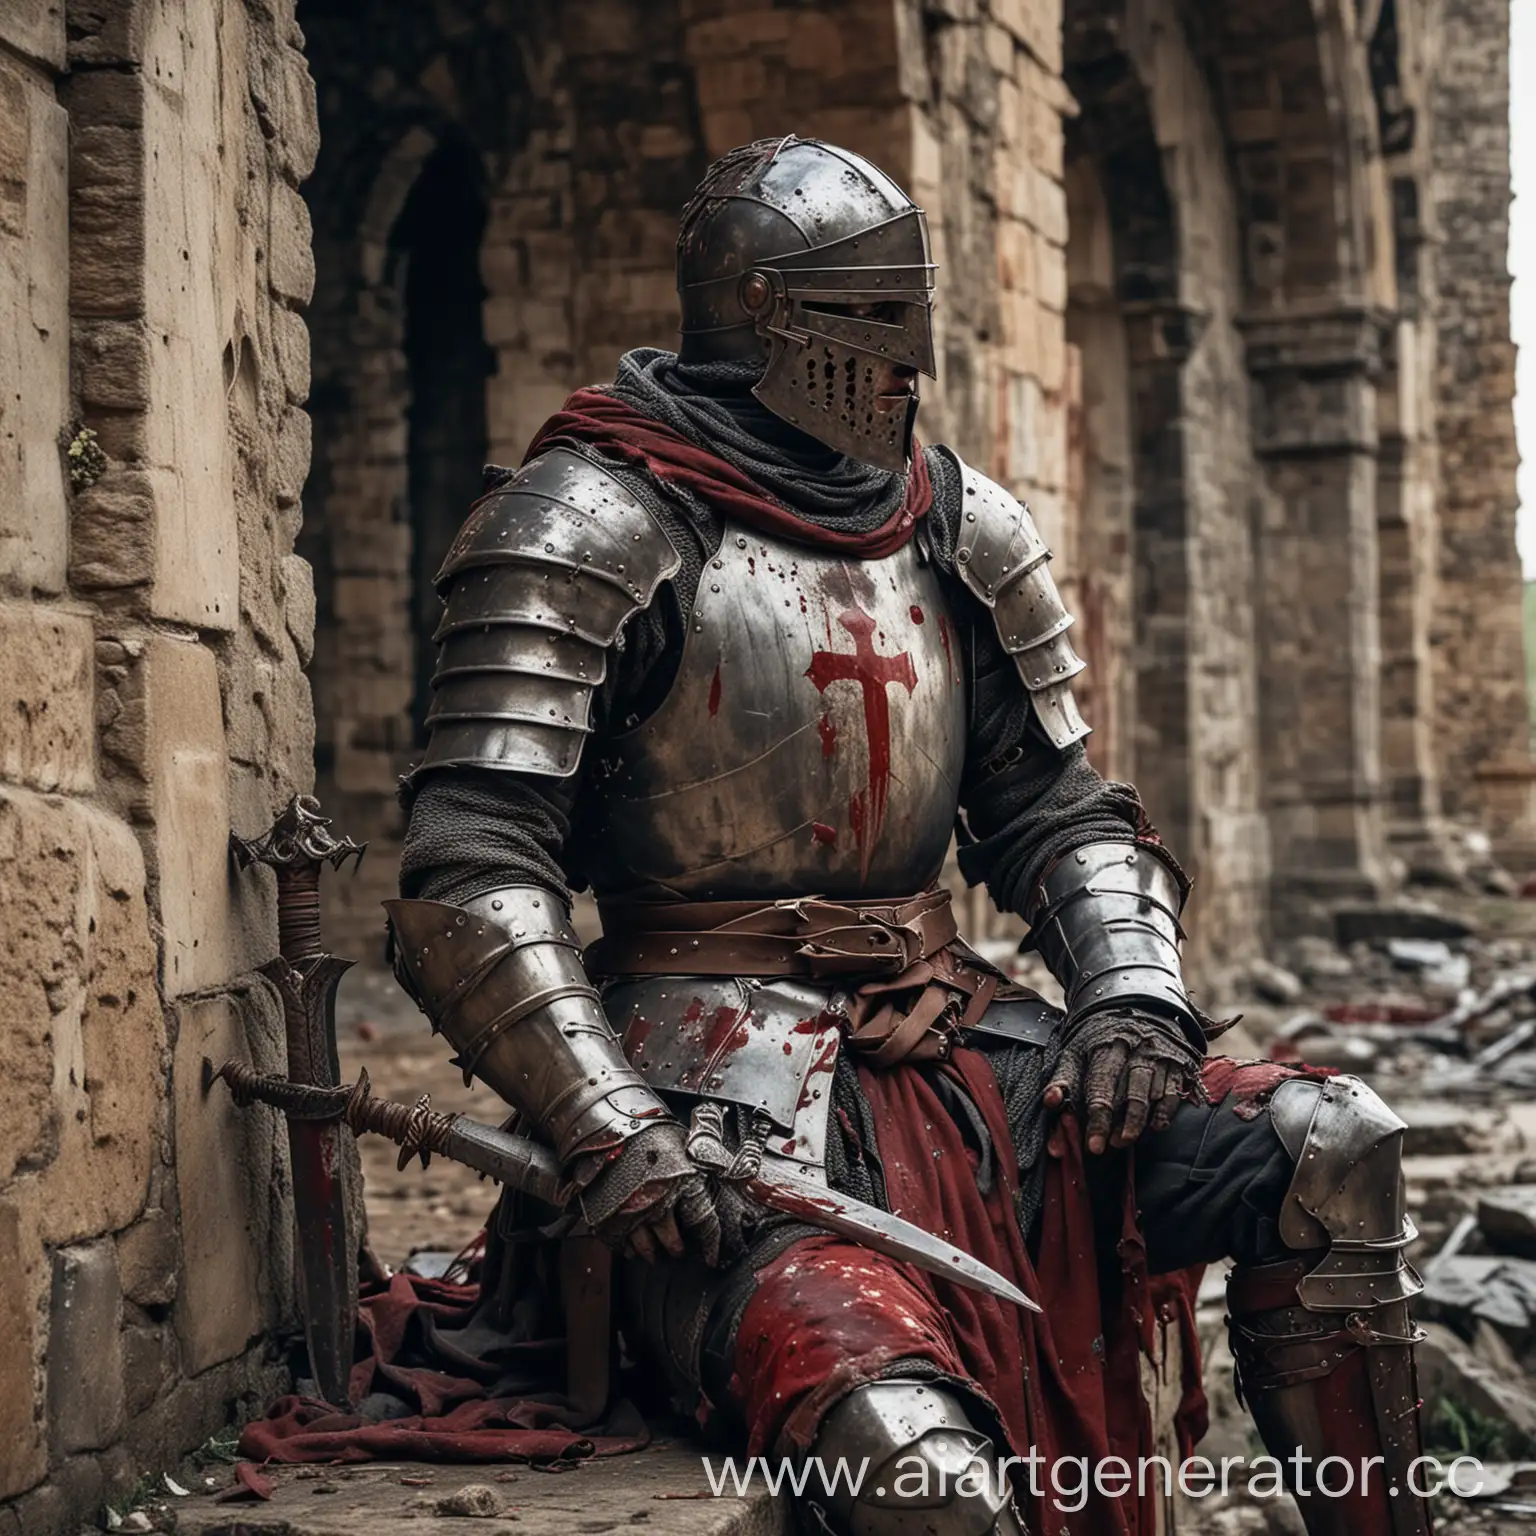 A male knight of the Middle Ages, in battered armor that is covered in blood, with a broken sword in his hand, sits at a dilapidated castle, Leaning against its wall, wearing a helmet